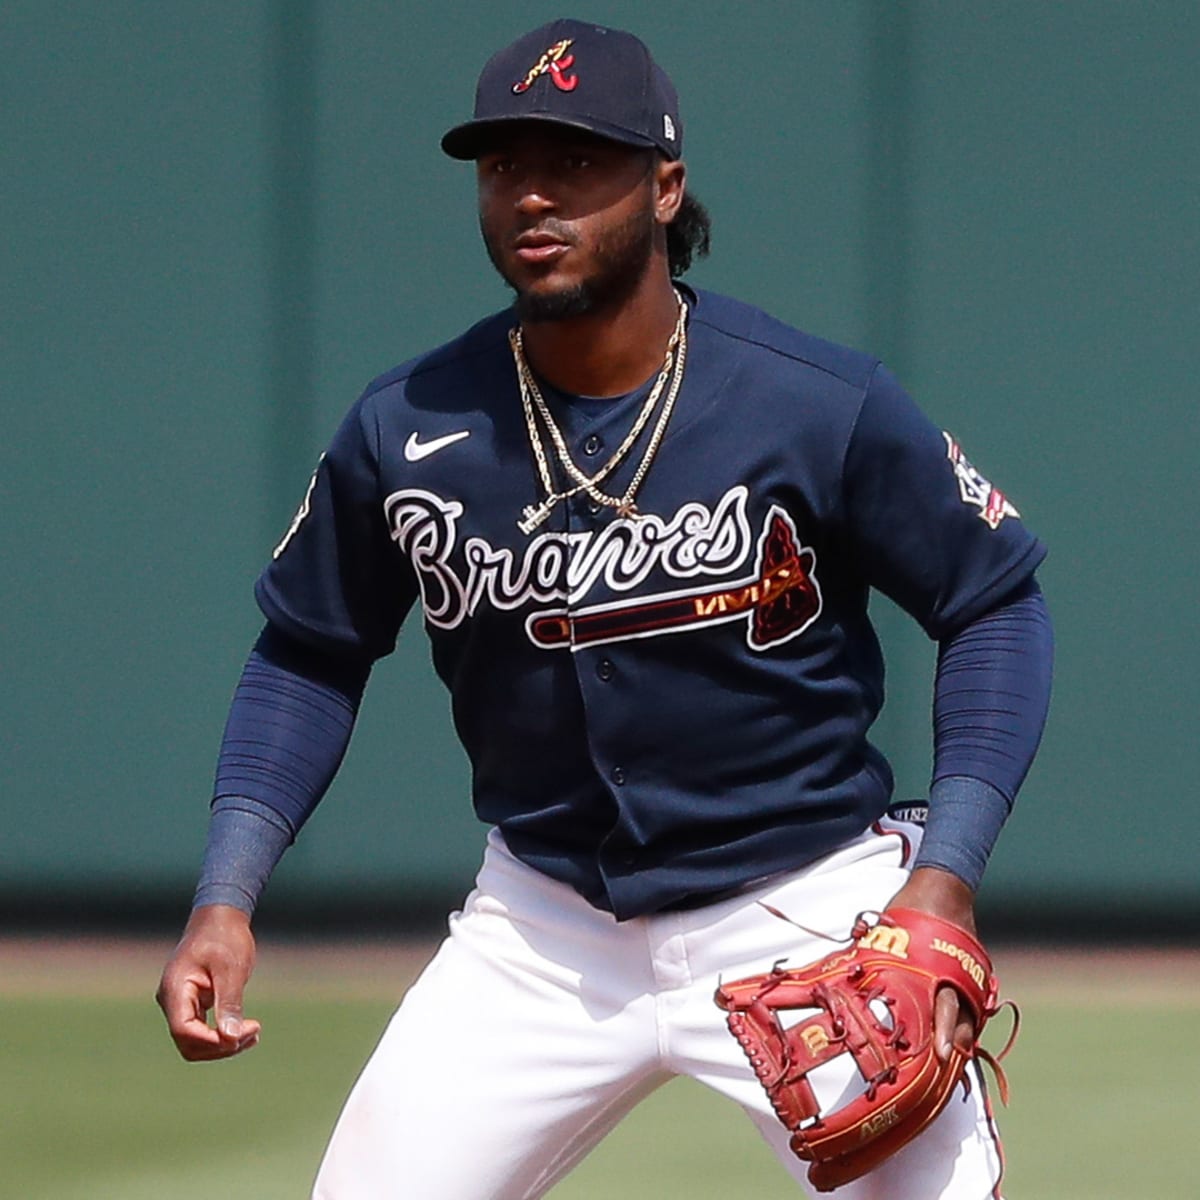 Which Braves player is poised for a breakout 2022 season